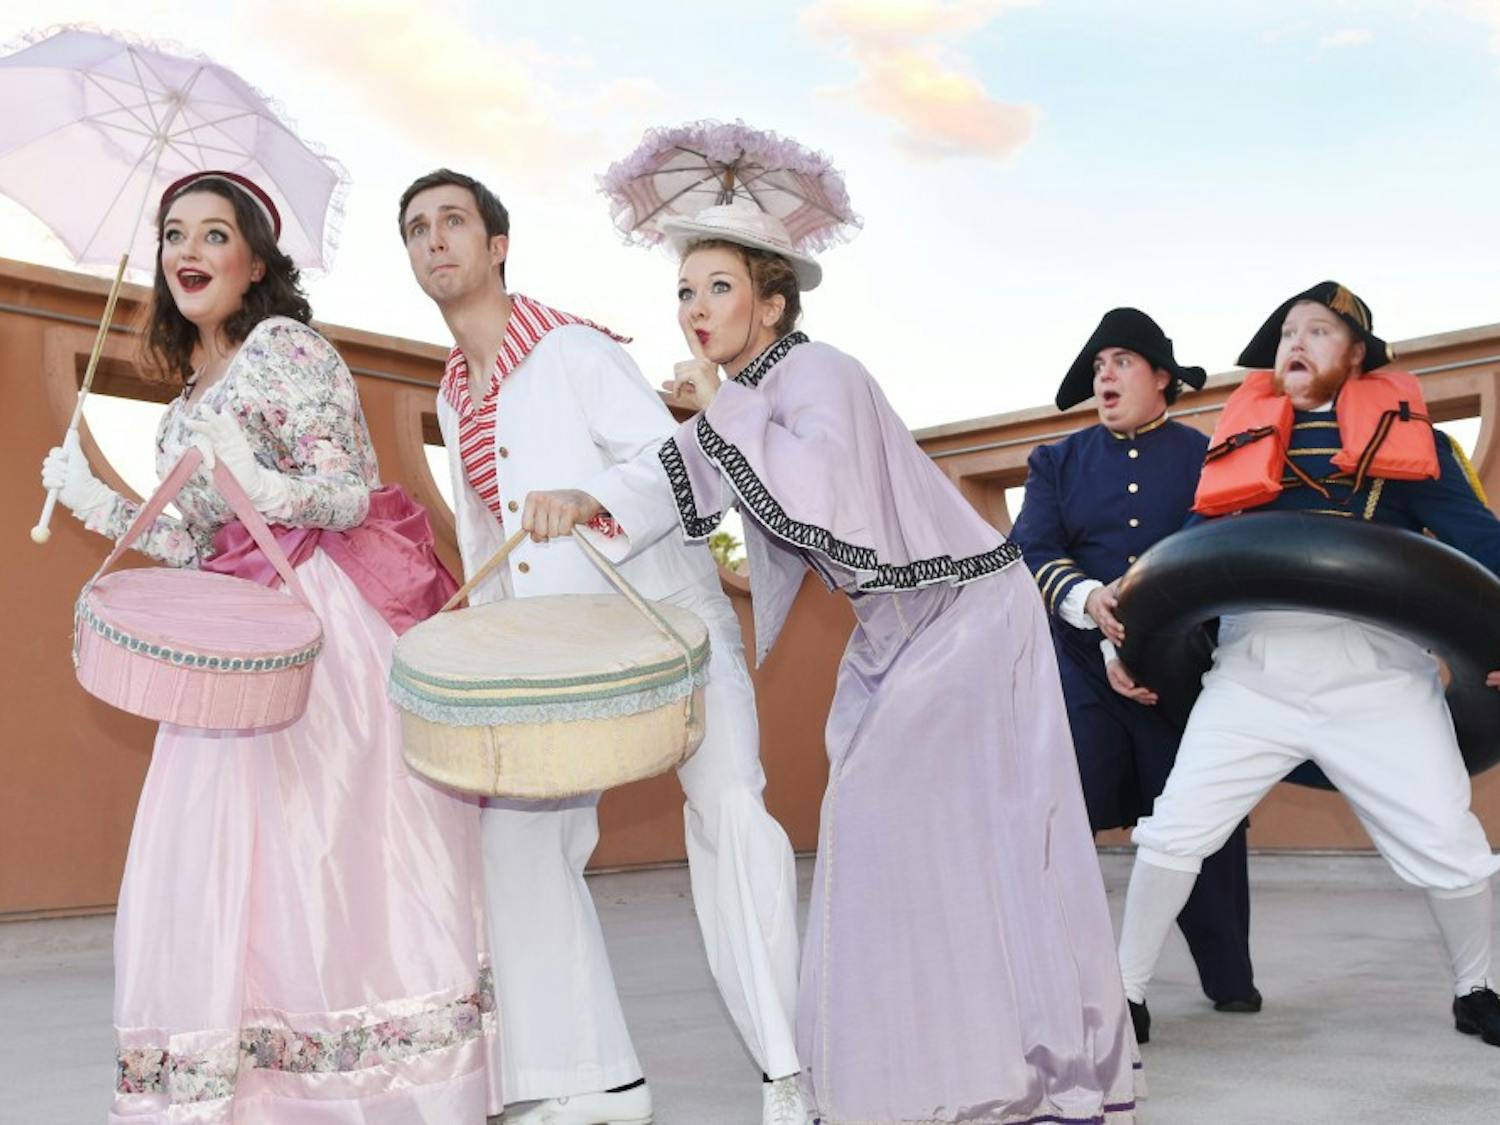 Actors perform a scene from H.M.S Pinafore at&nbsp;the ASU Tempe campus.&nbsp;